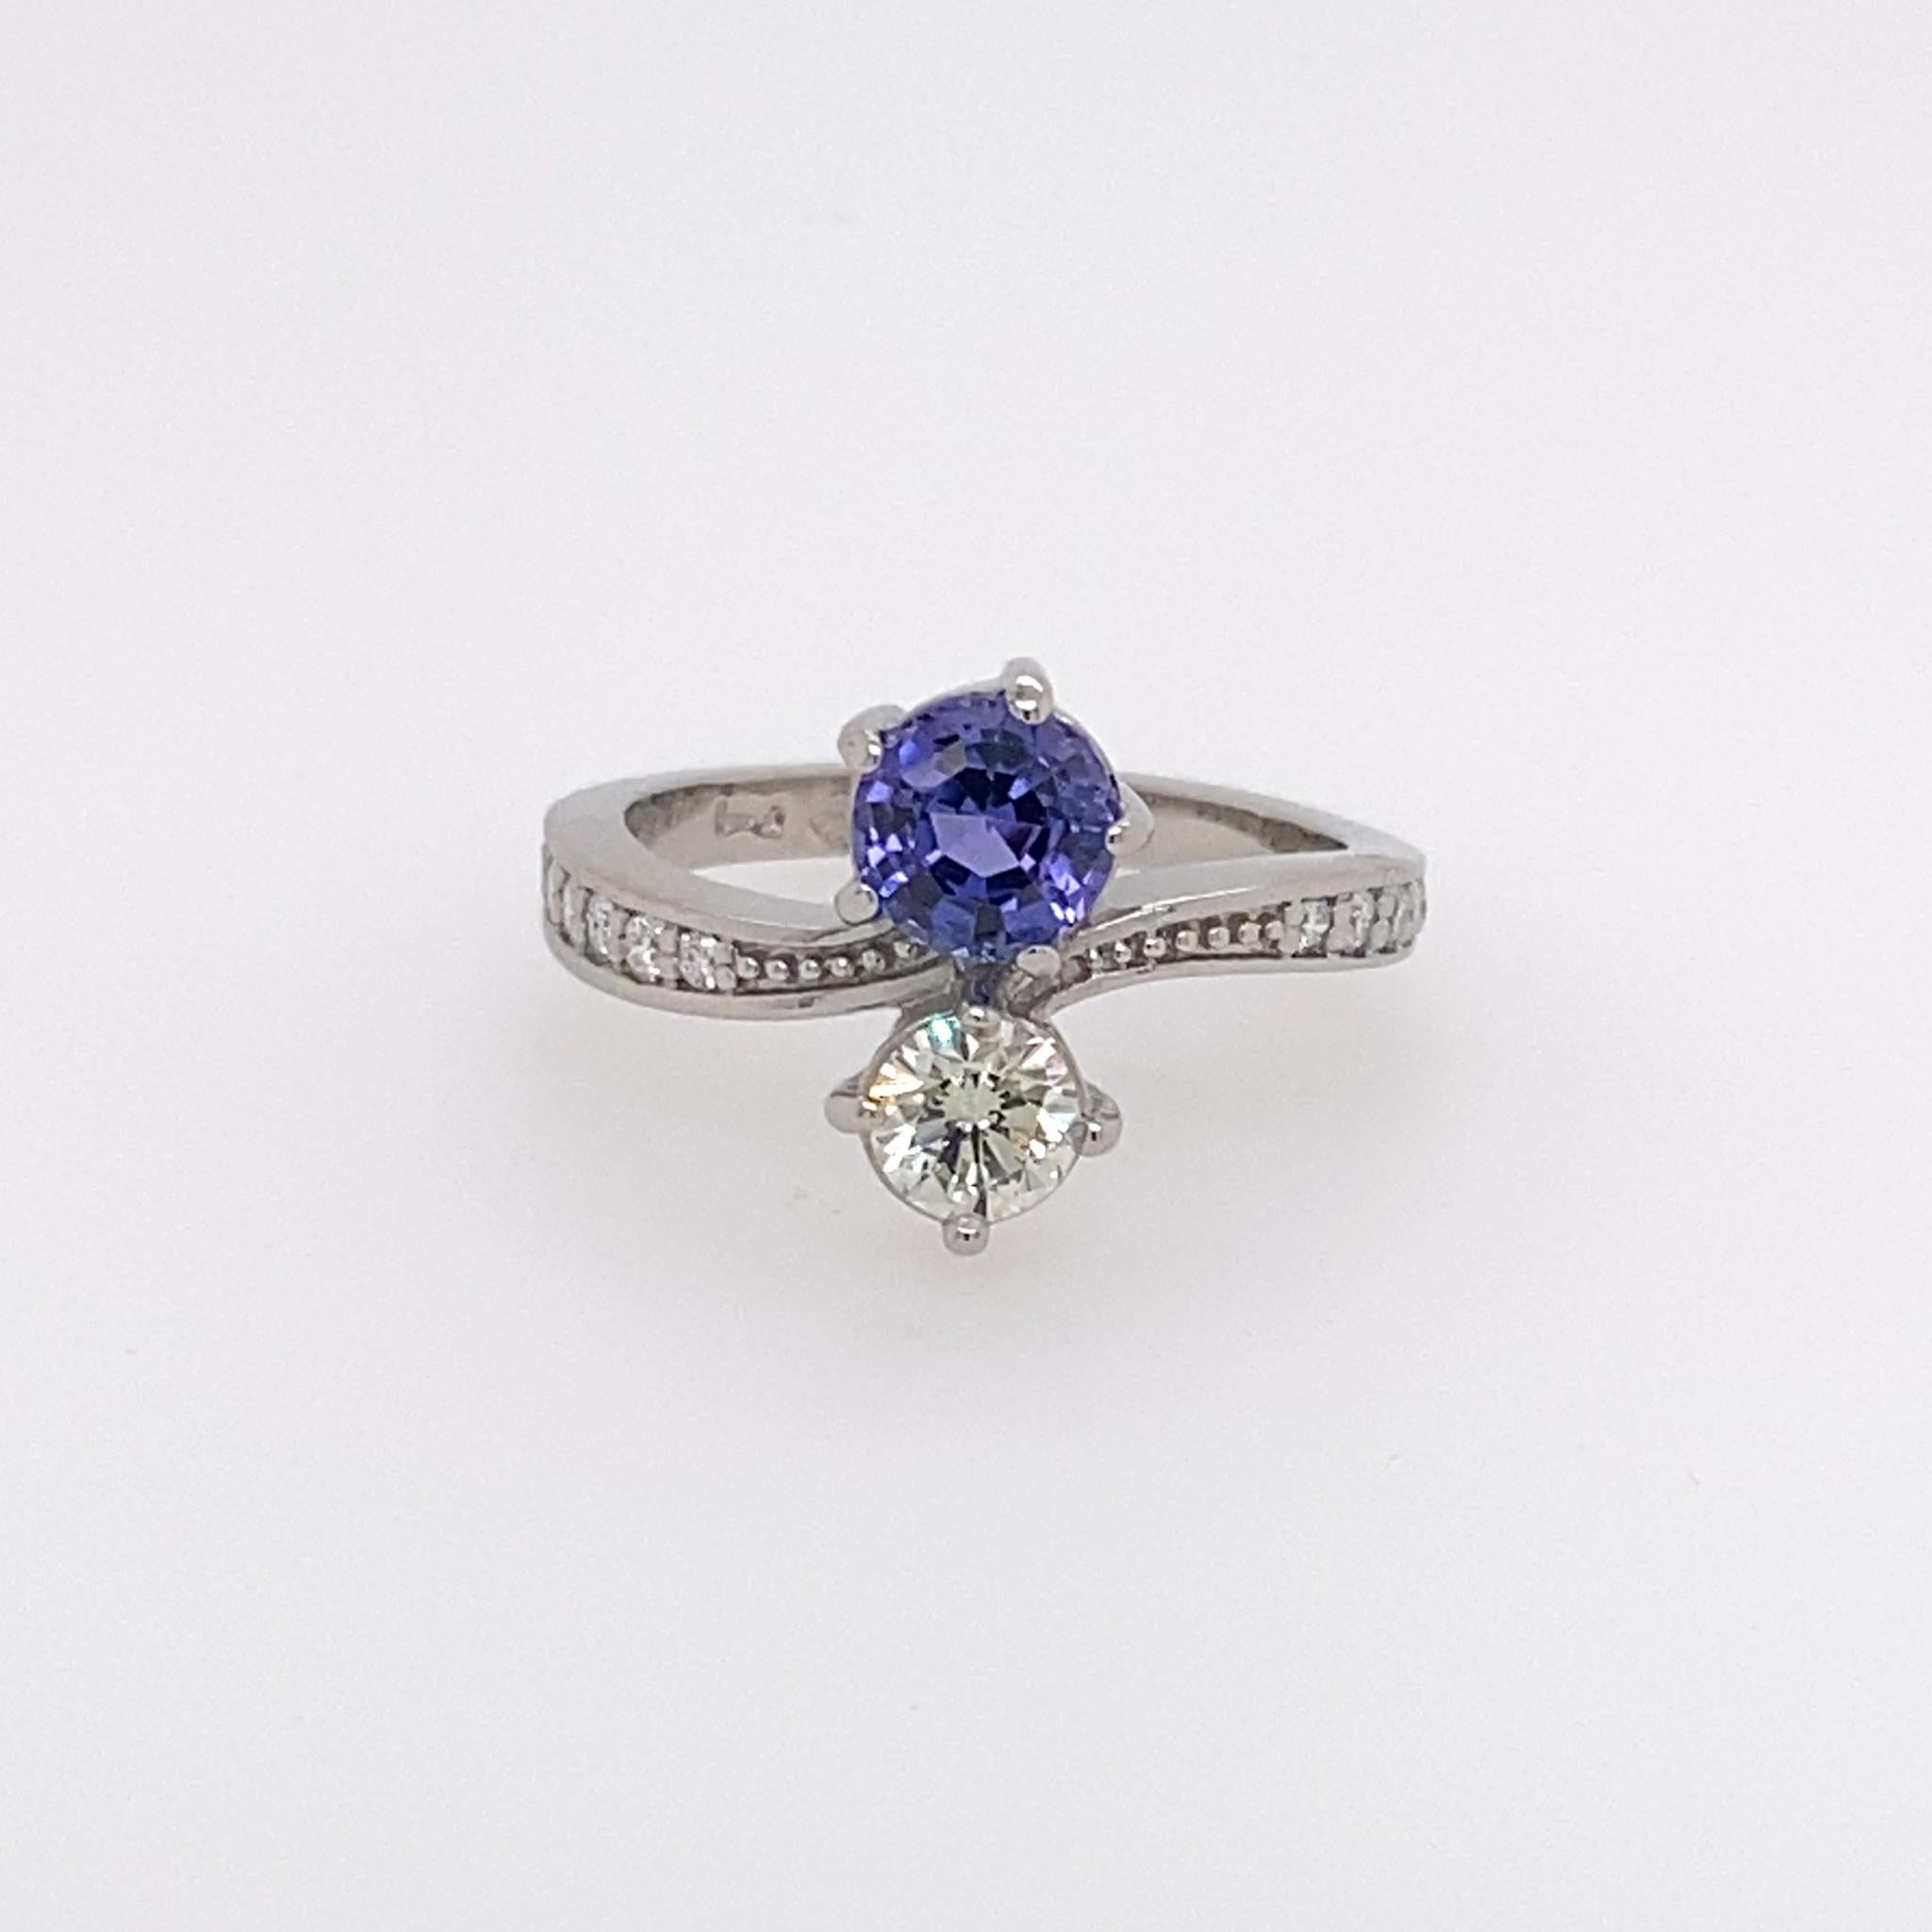 Classic design containing a round modified step cut Tanzanite secured in a five claw setting and round brilliant cut diamond  in four claw setting. The two stone are opposing one another. The curved shoulders each house round brilliant cut diamonds